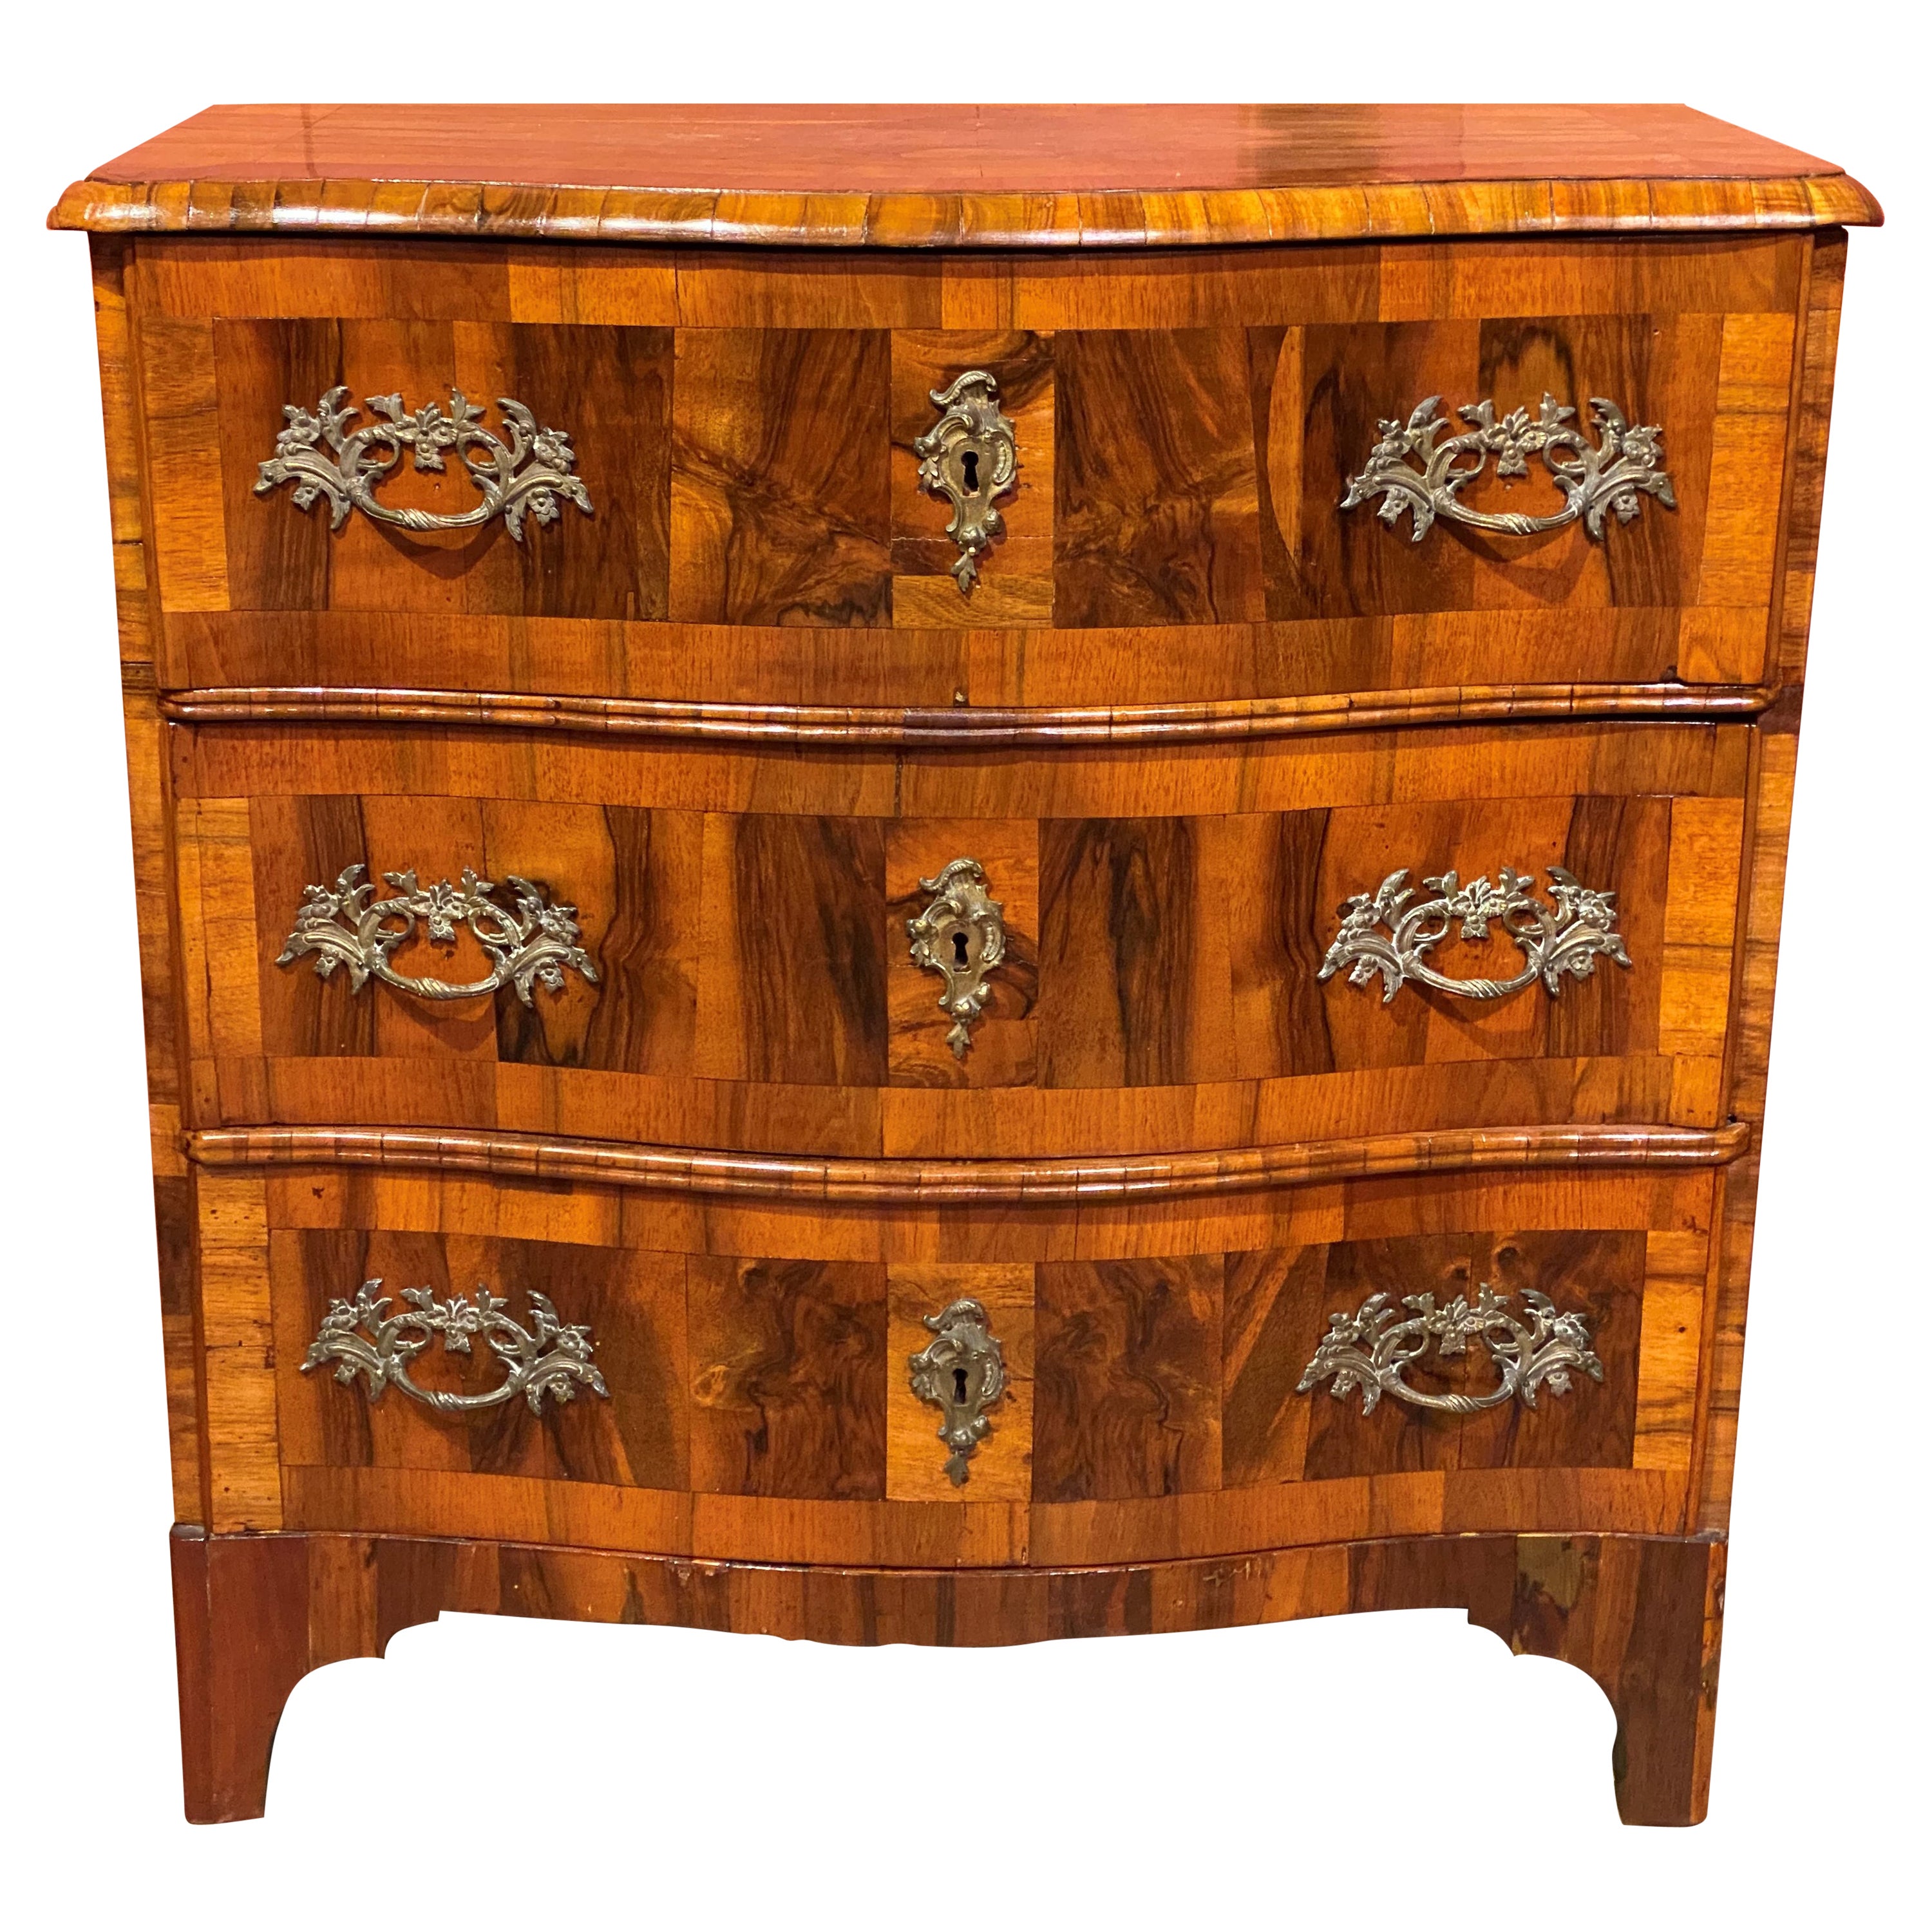 18th C French Walnut 3-Drawer Serpentine Commode with Original Rococo Hardware For Sale